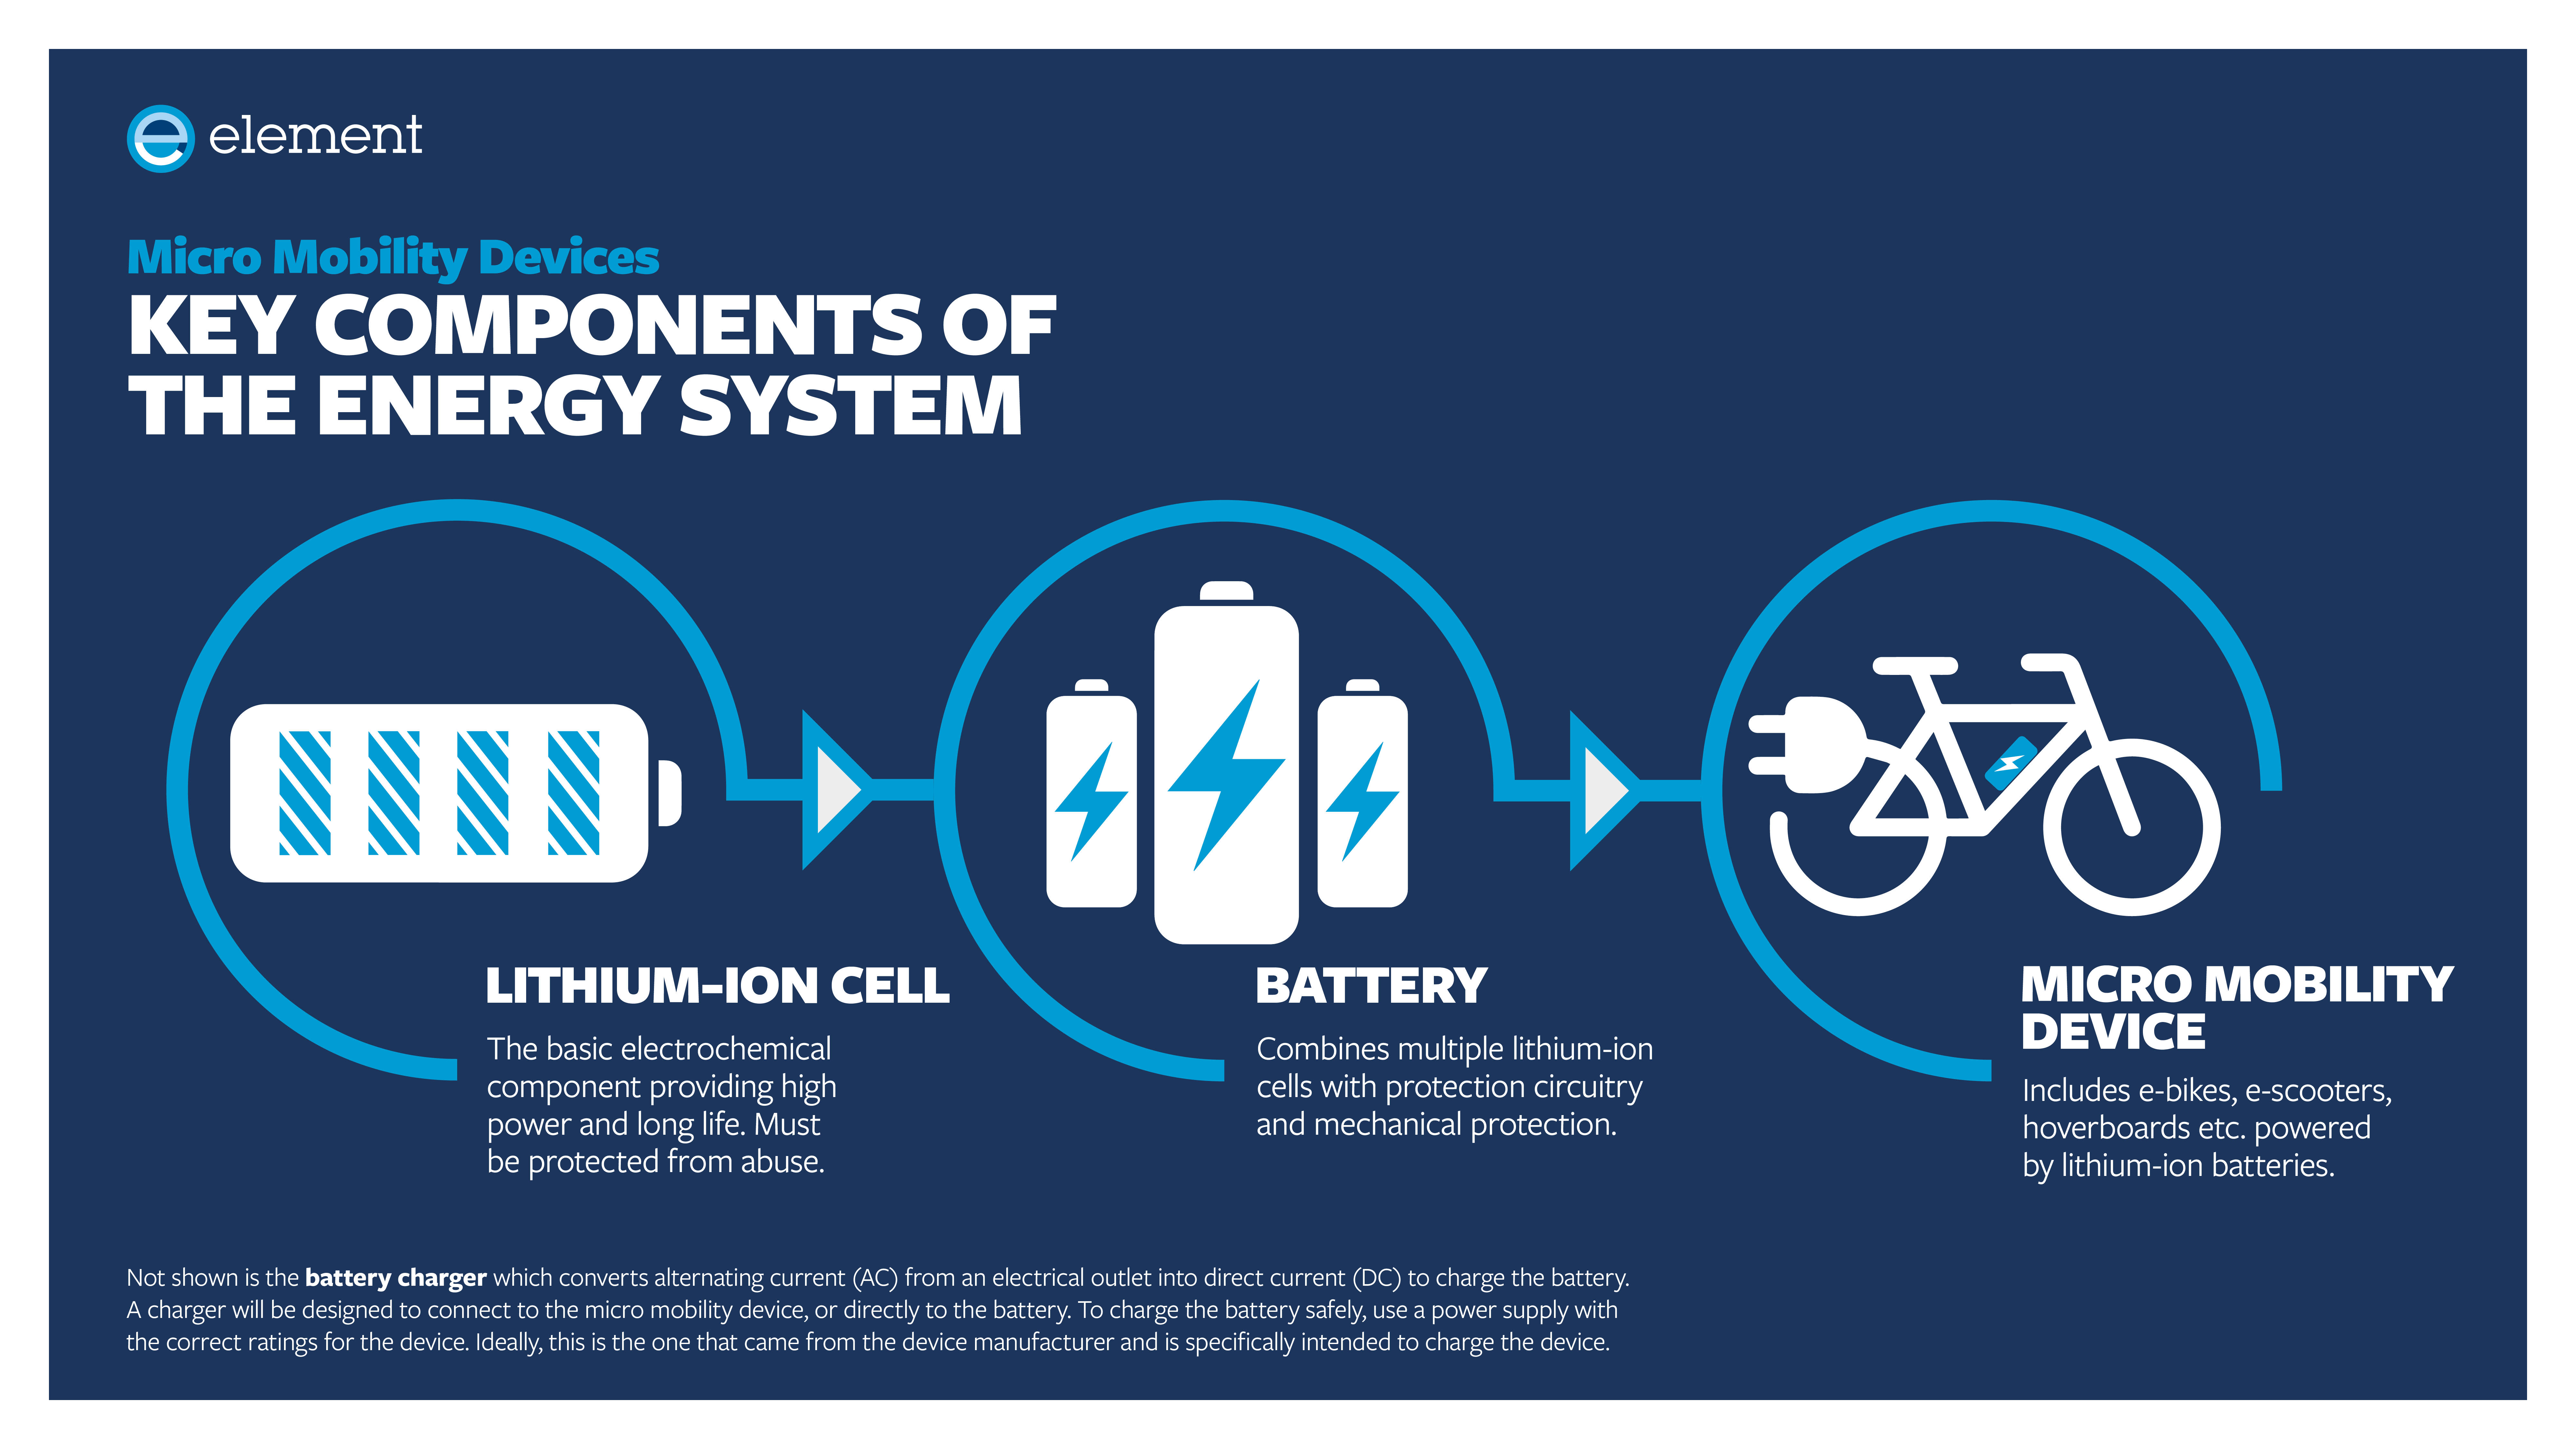 Micro Mobility Devices - Key Components of the Energy System